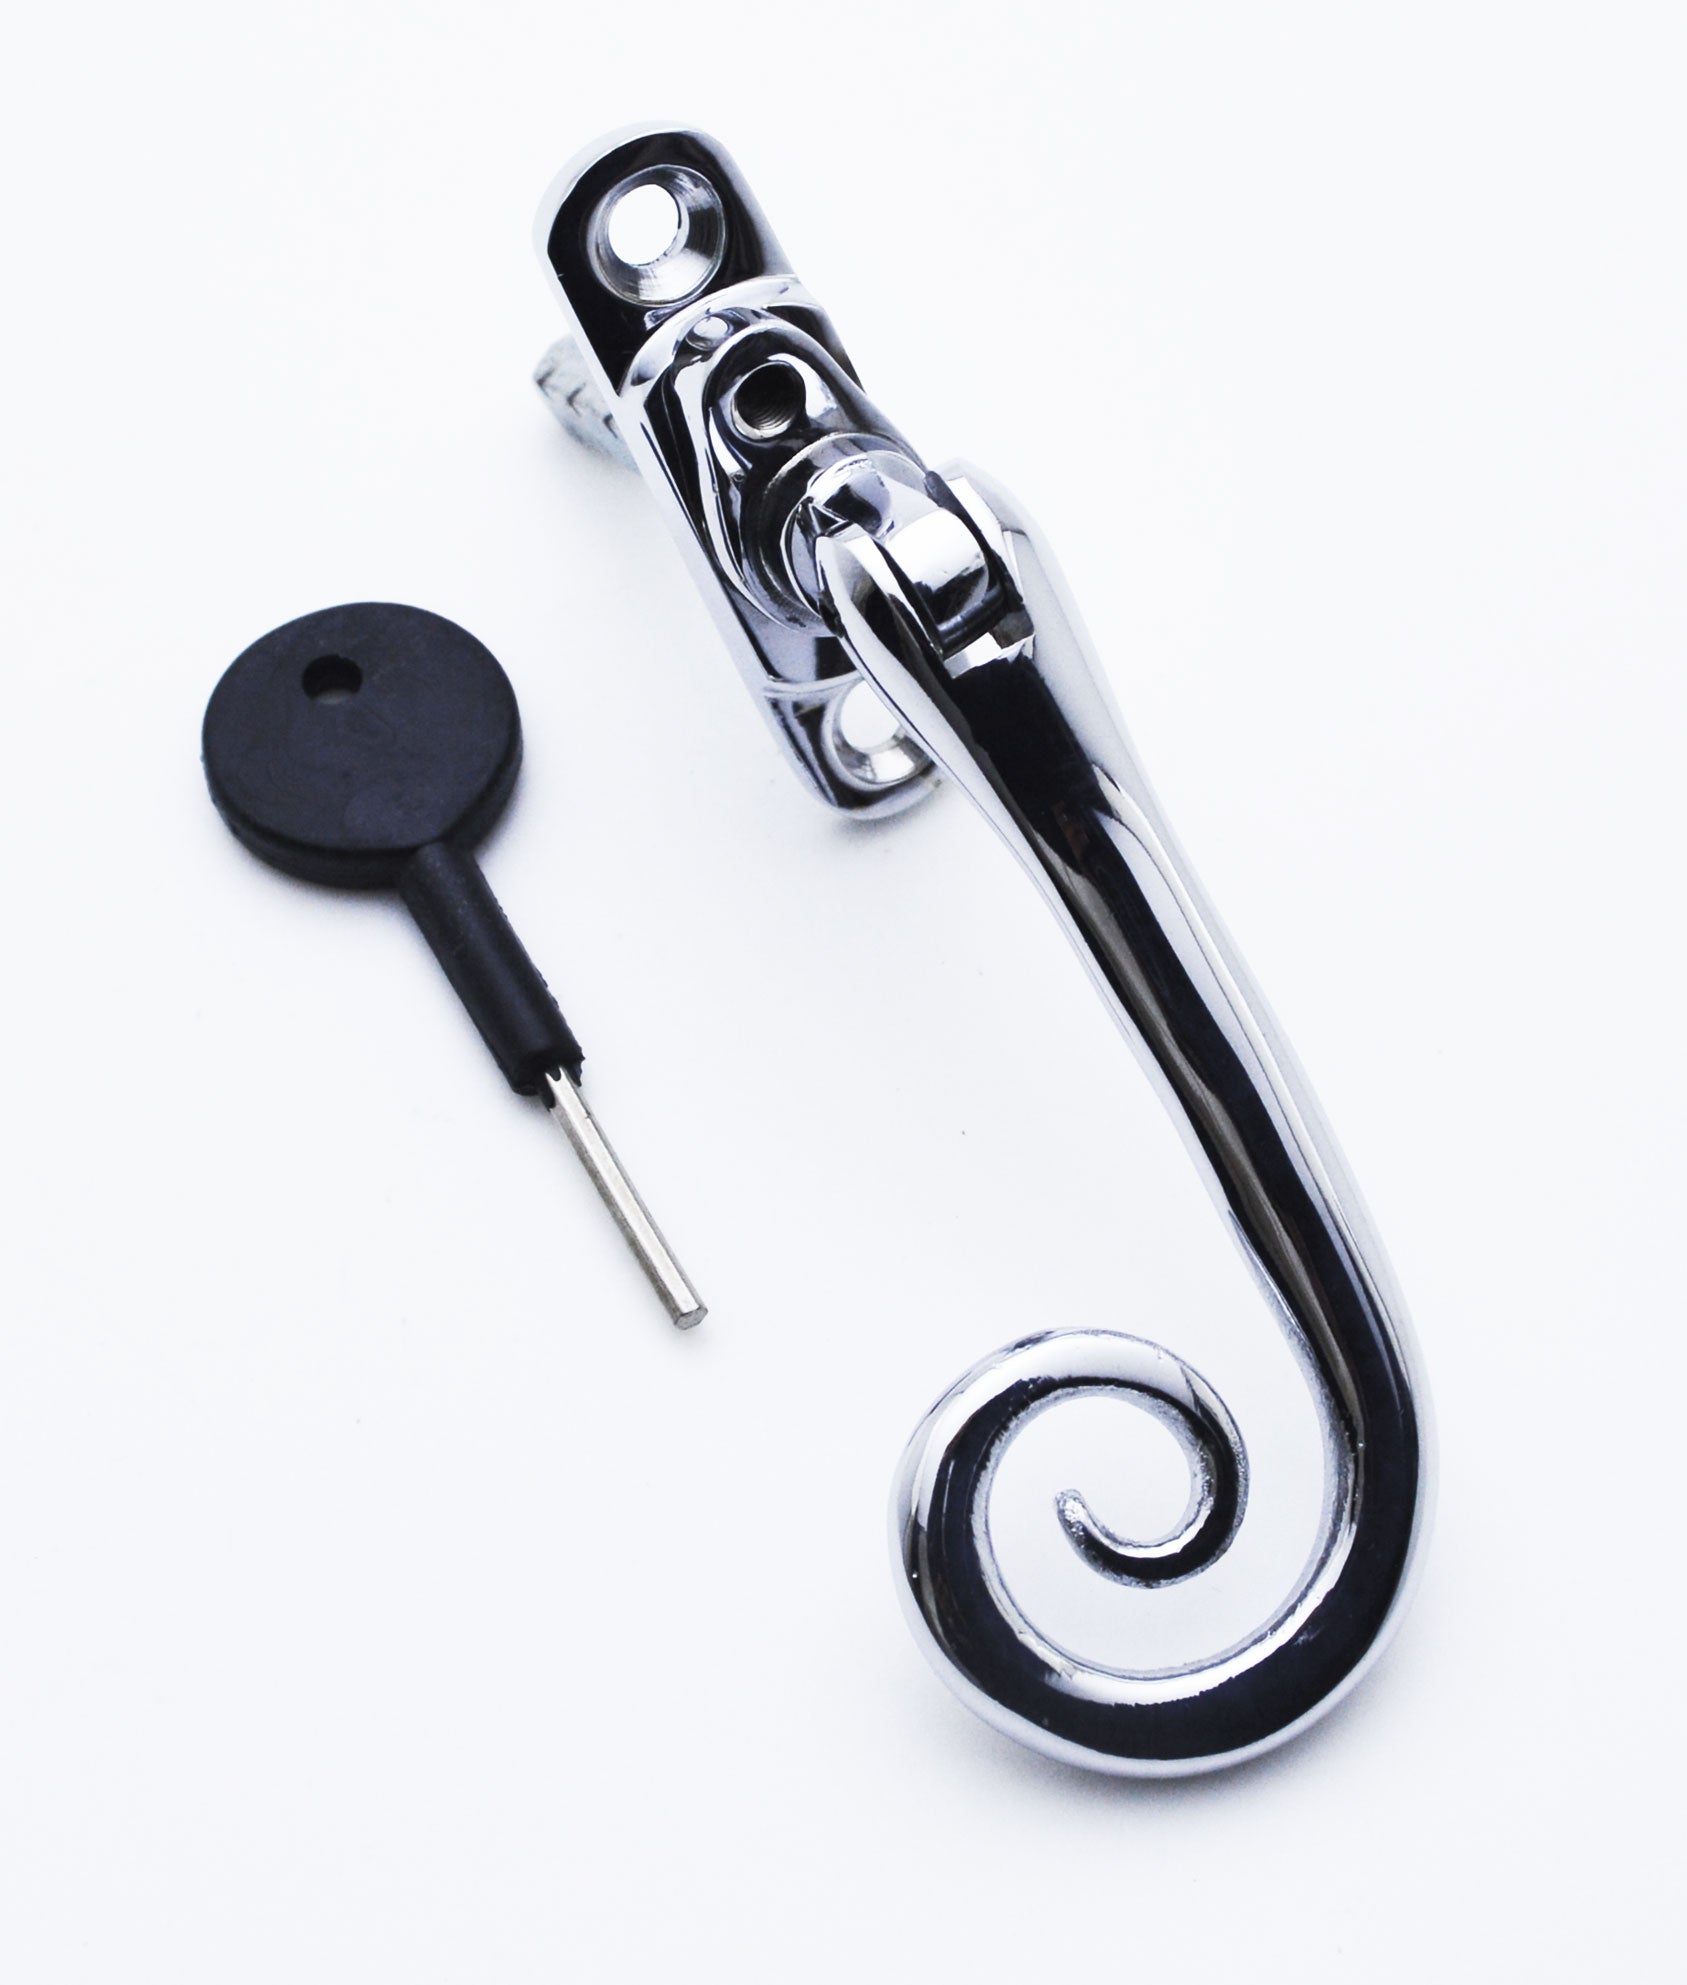 Curly Tail Window Espagnolette Handle